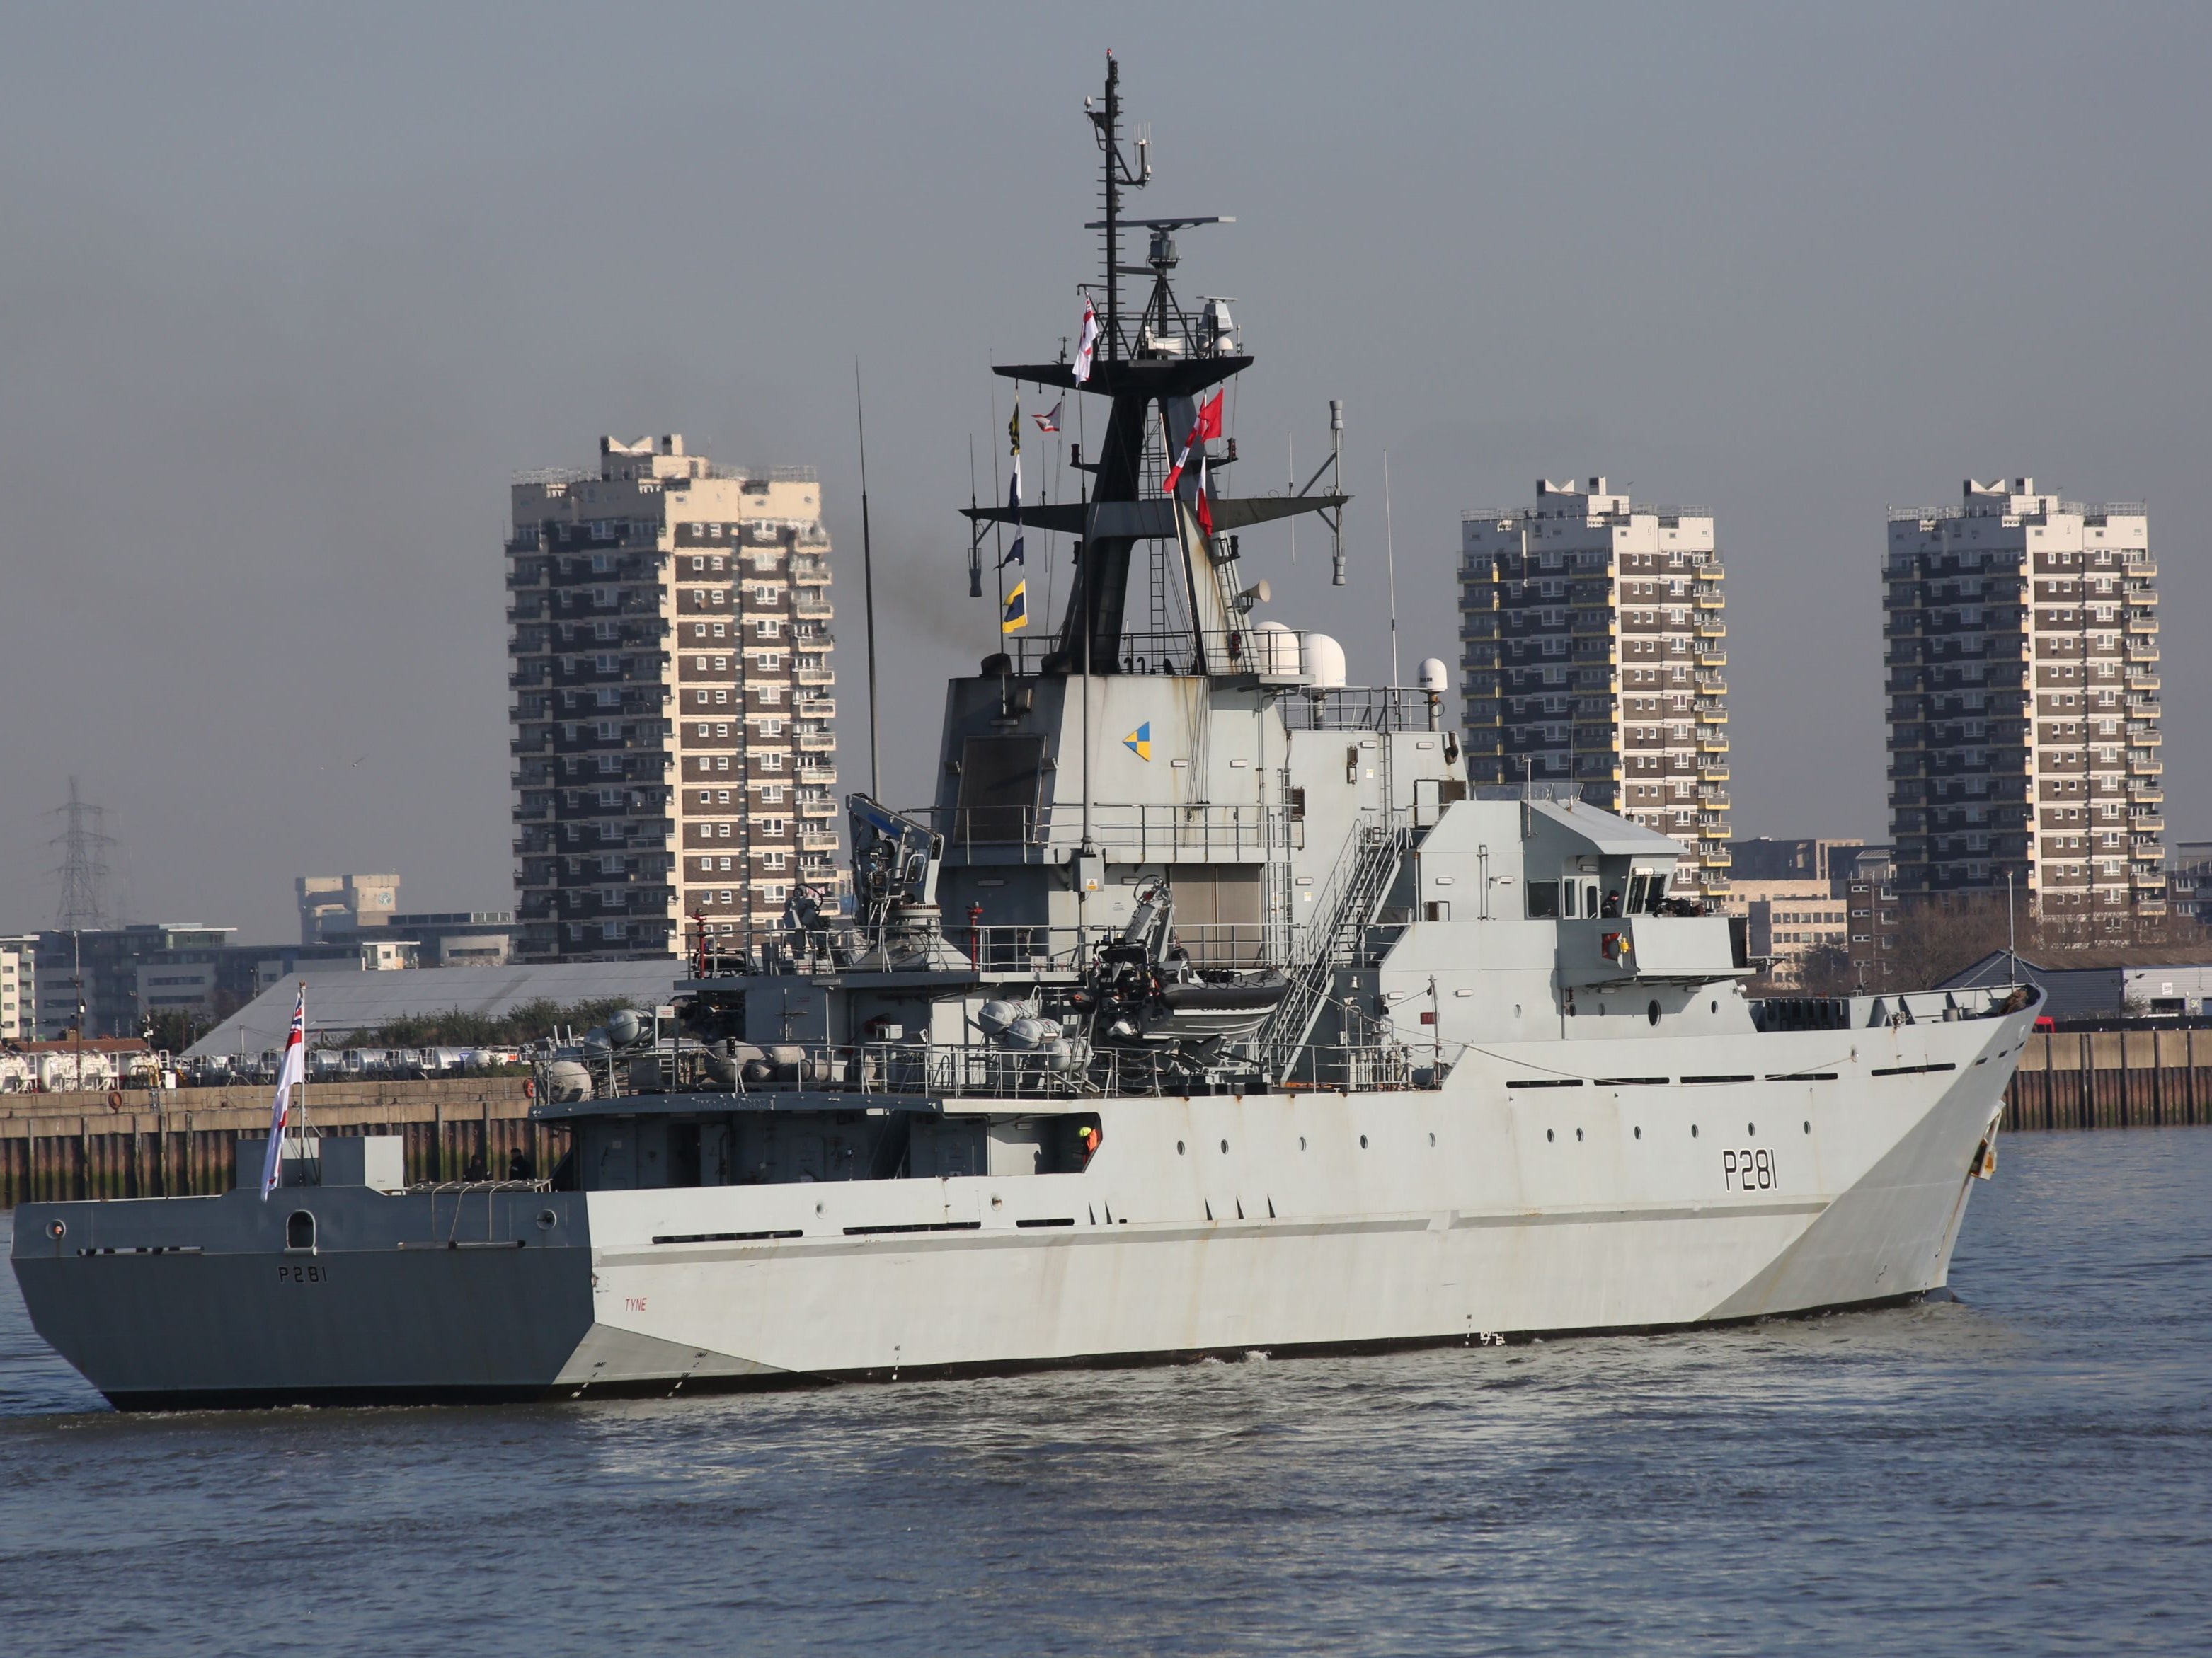 The HMS Tyne is one of four Navy vessels that could be used to patrol British waters in the event of a no-deal Brexit.